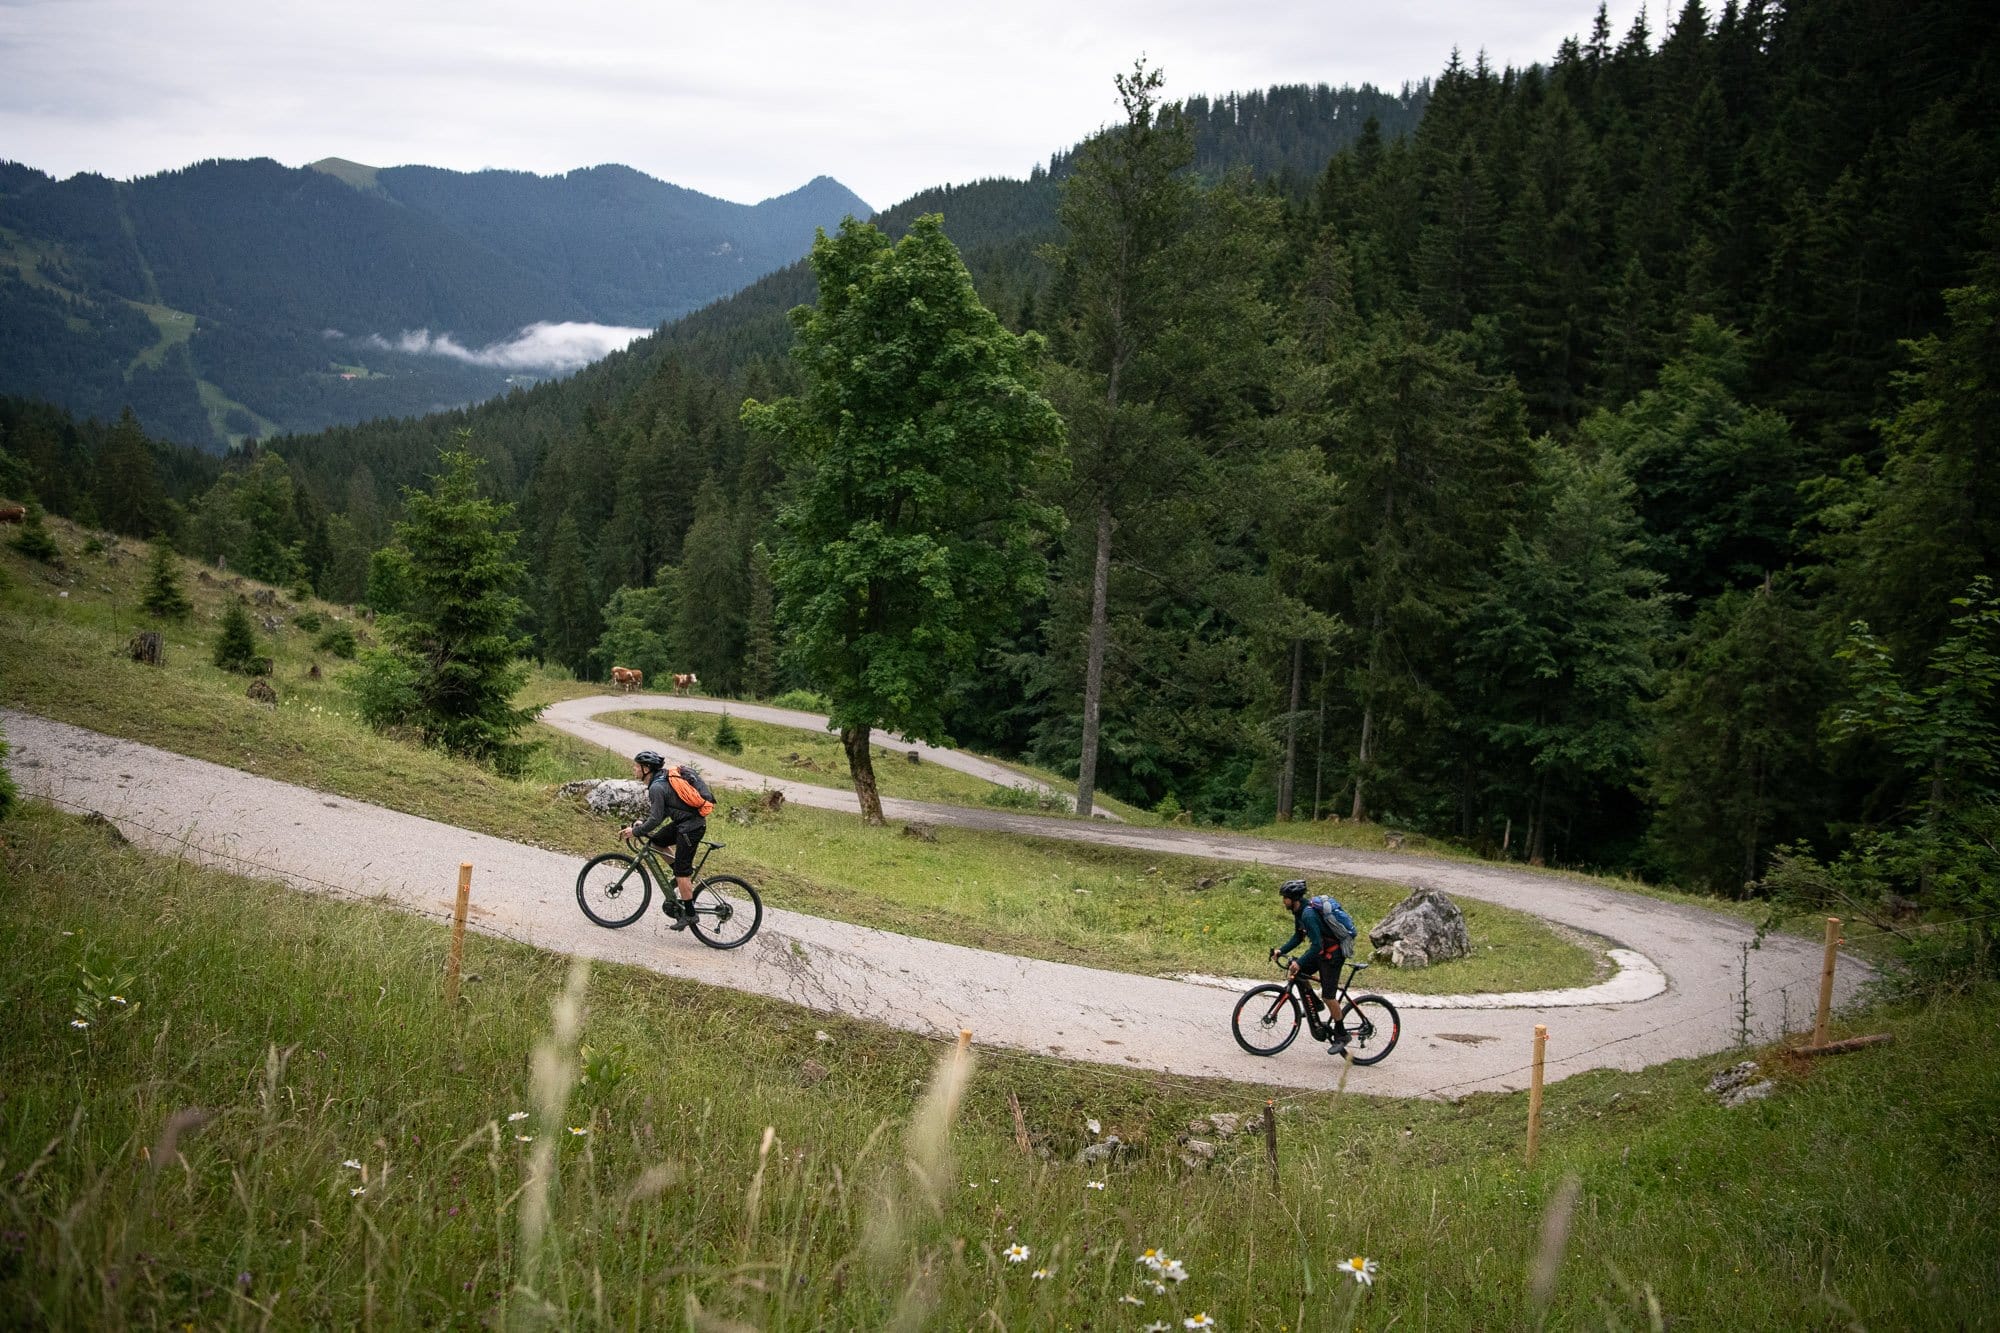 The Best Tips for Adventure Cycling